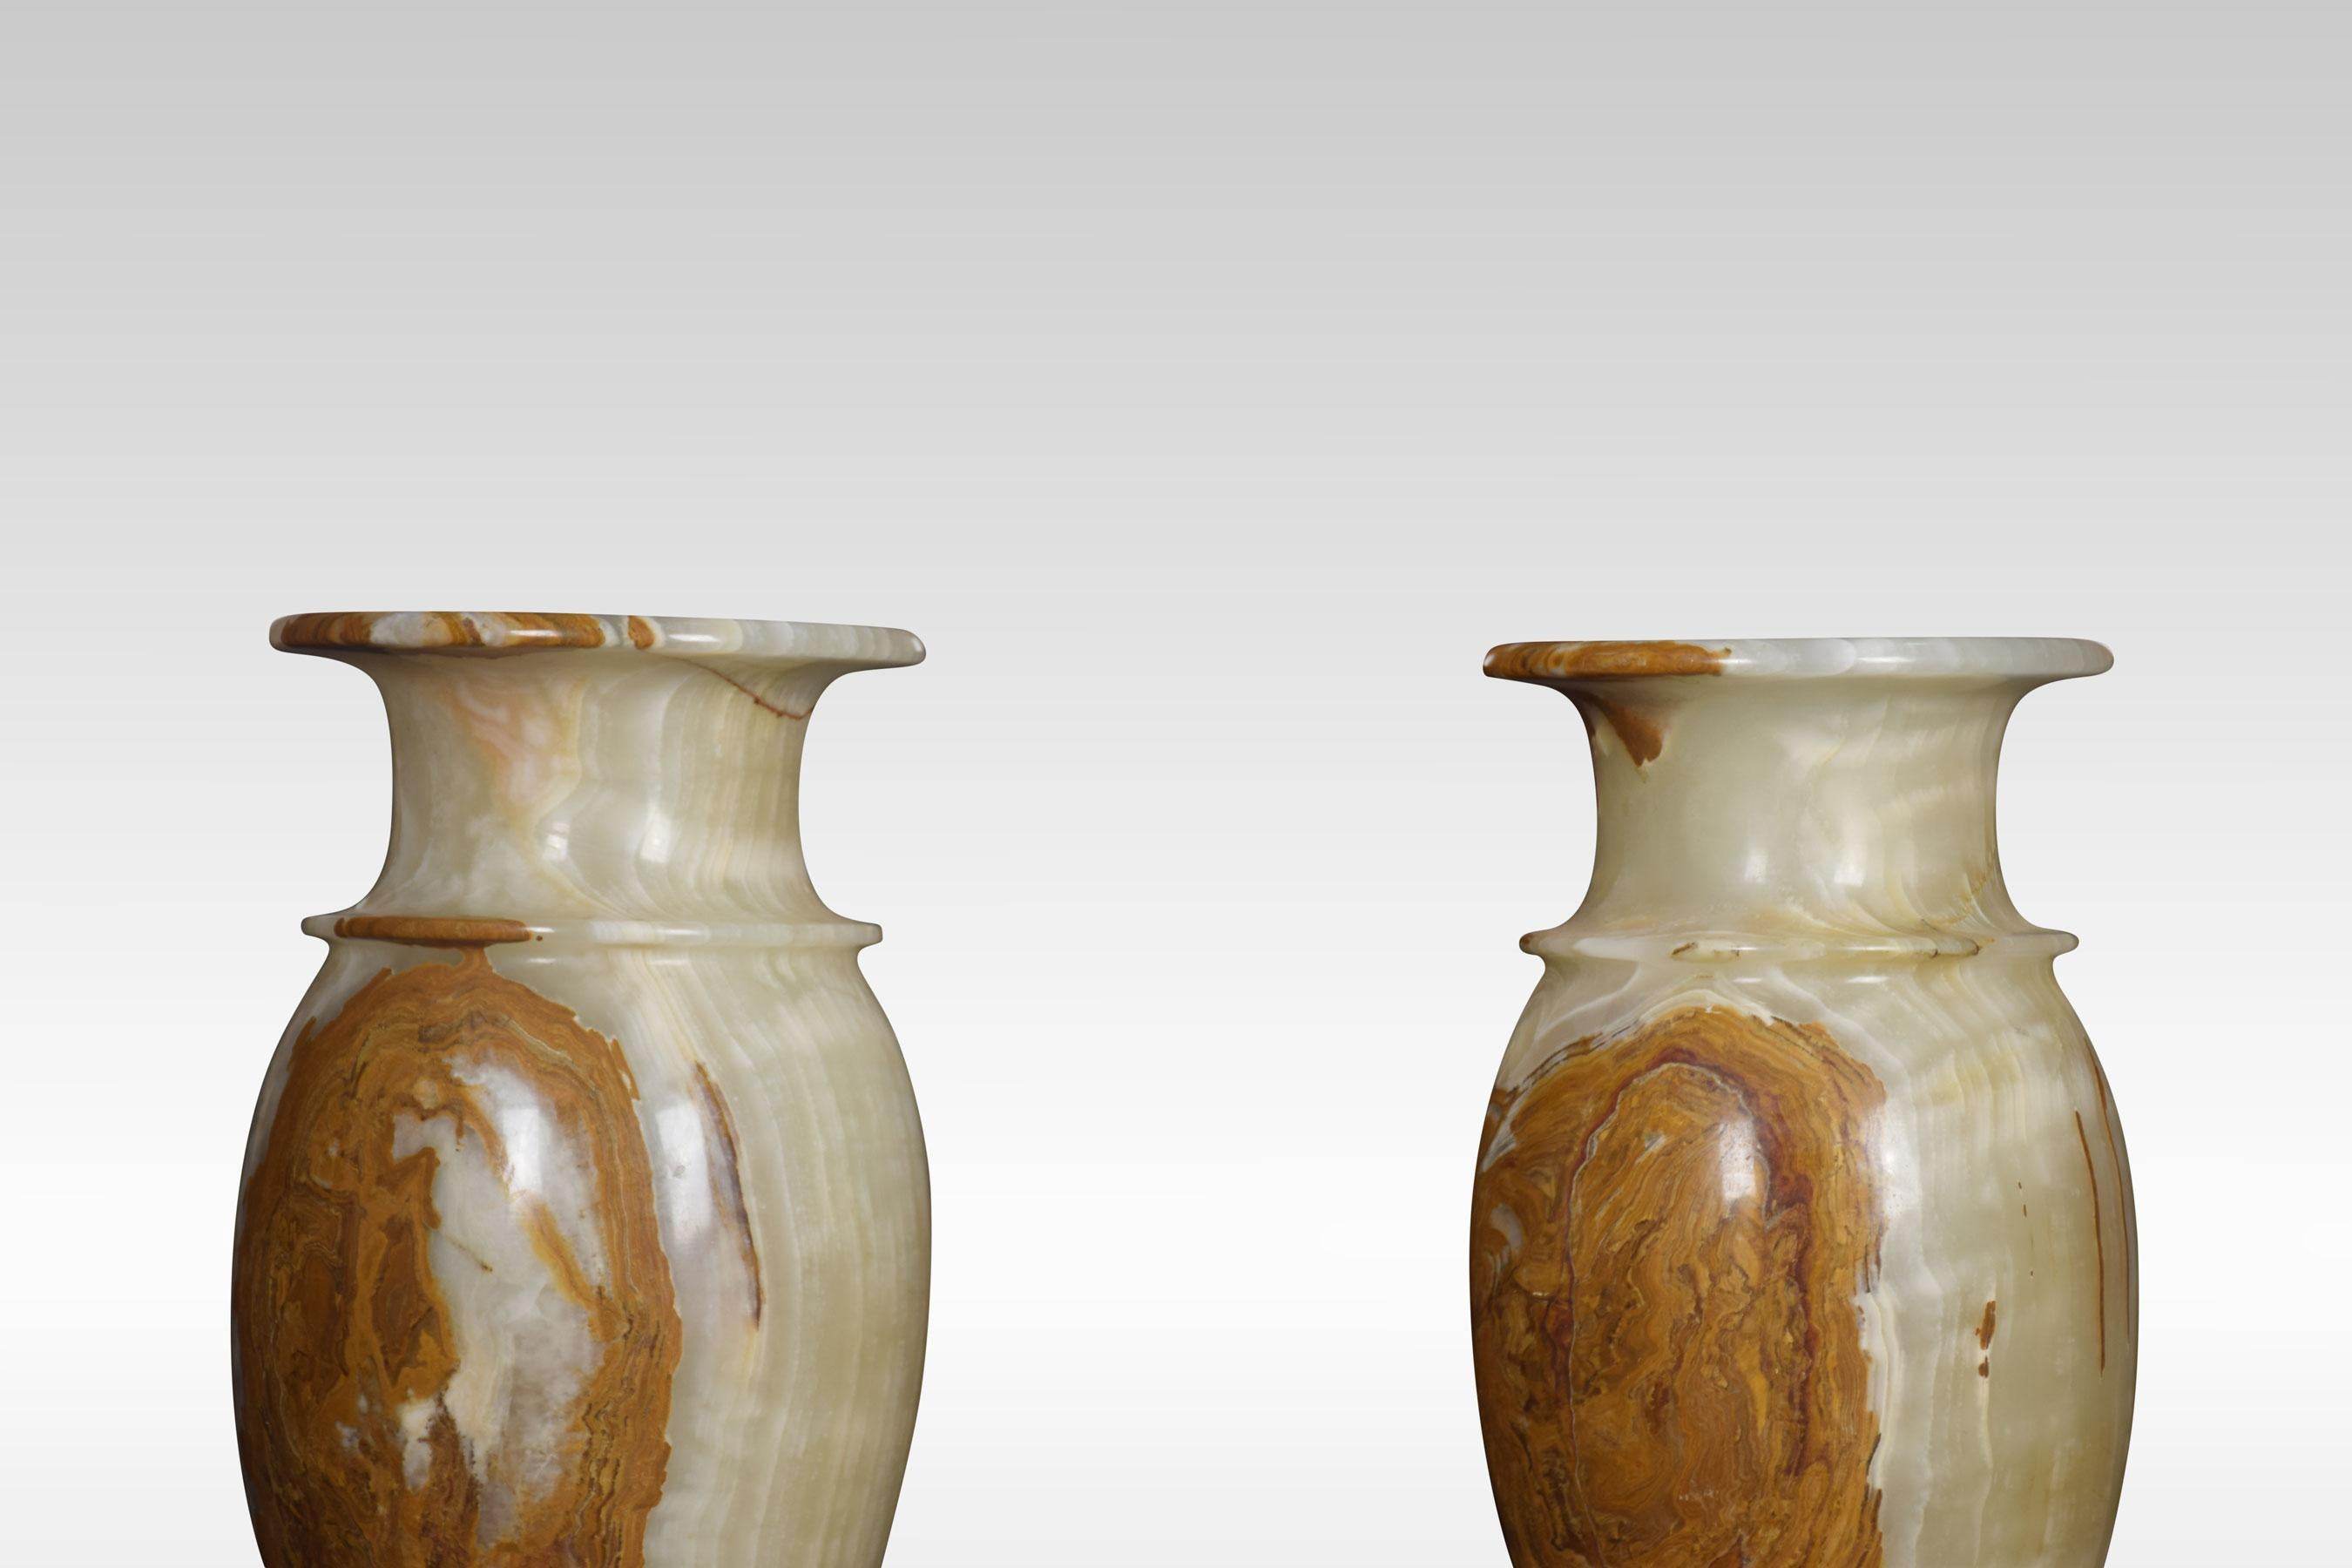 Very large pair of onyx vases, the rolling rims above slender baluster form terminating in circular bases.
Dimensions:
Height 24 inches
Width 10 inches
Depth 10 inches.